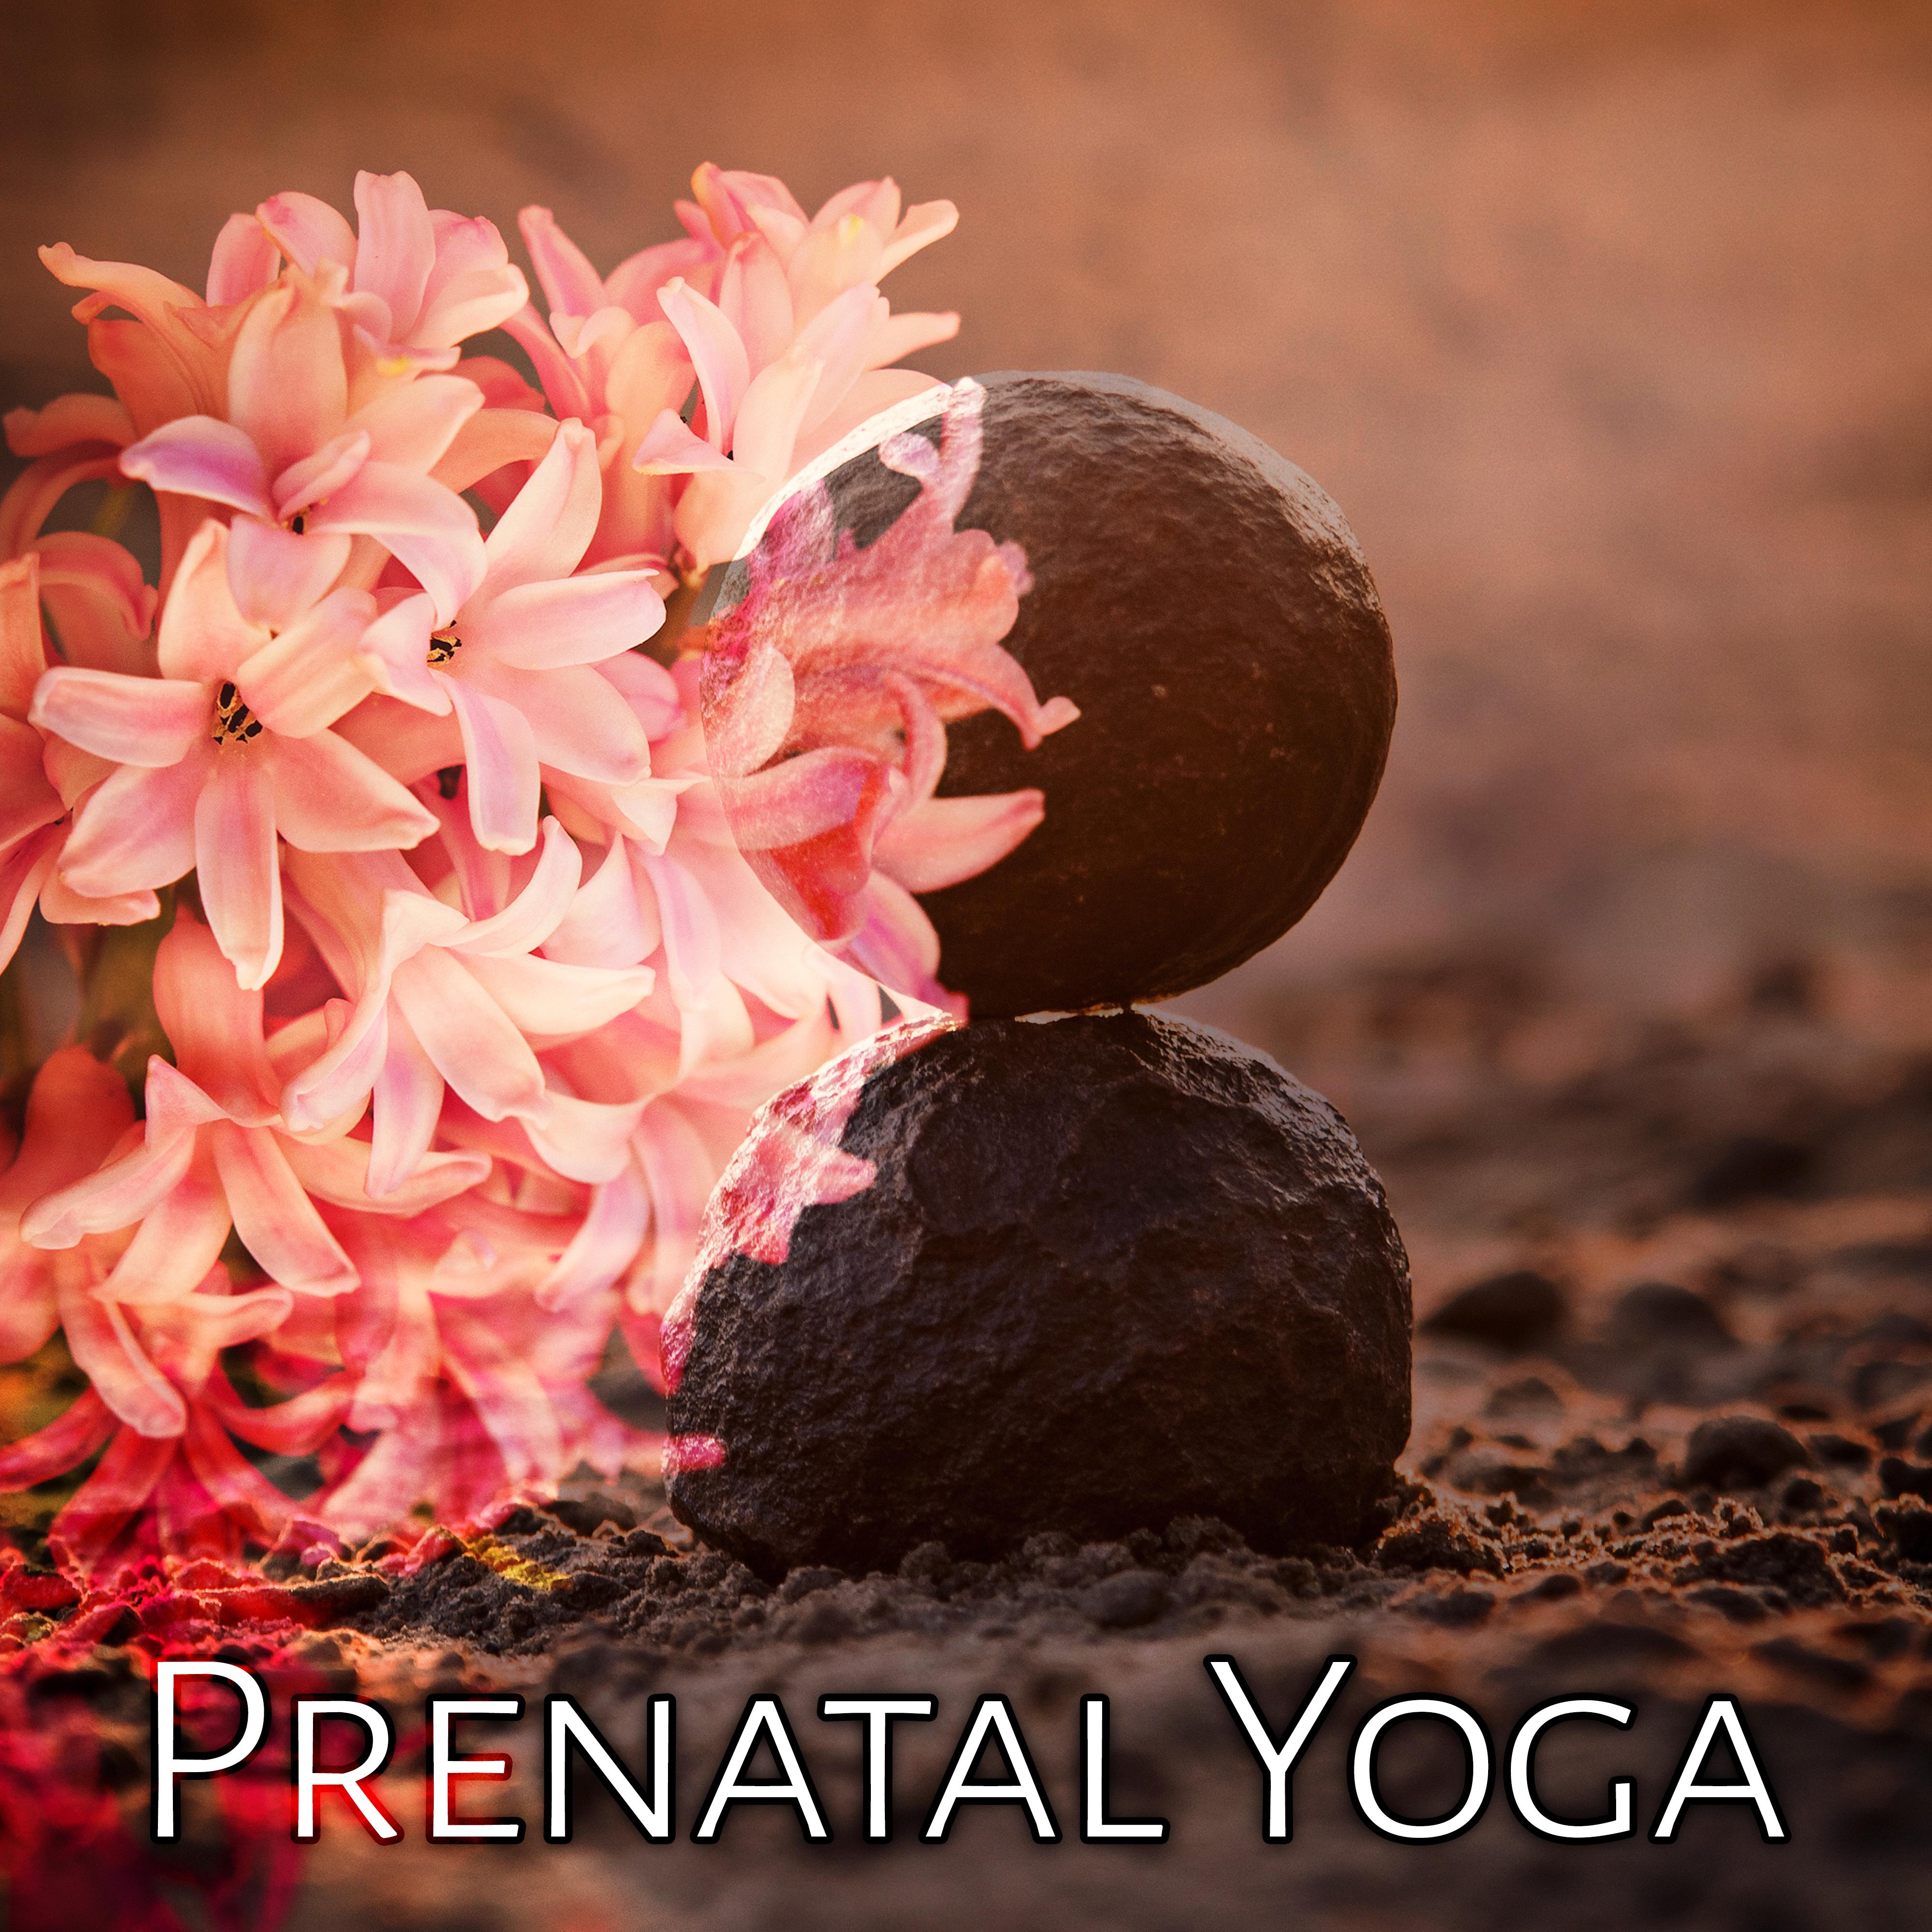 Prenatal Yoga - Healing Music Therapy for Pregnant, Calm Nature Sounds for Meditation, Relievie Stress, Relaxing Music